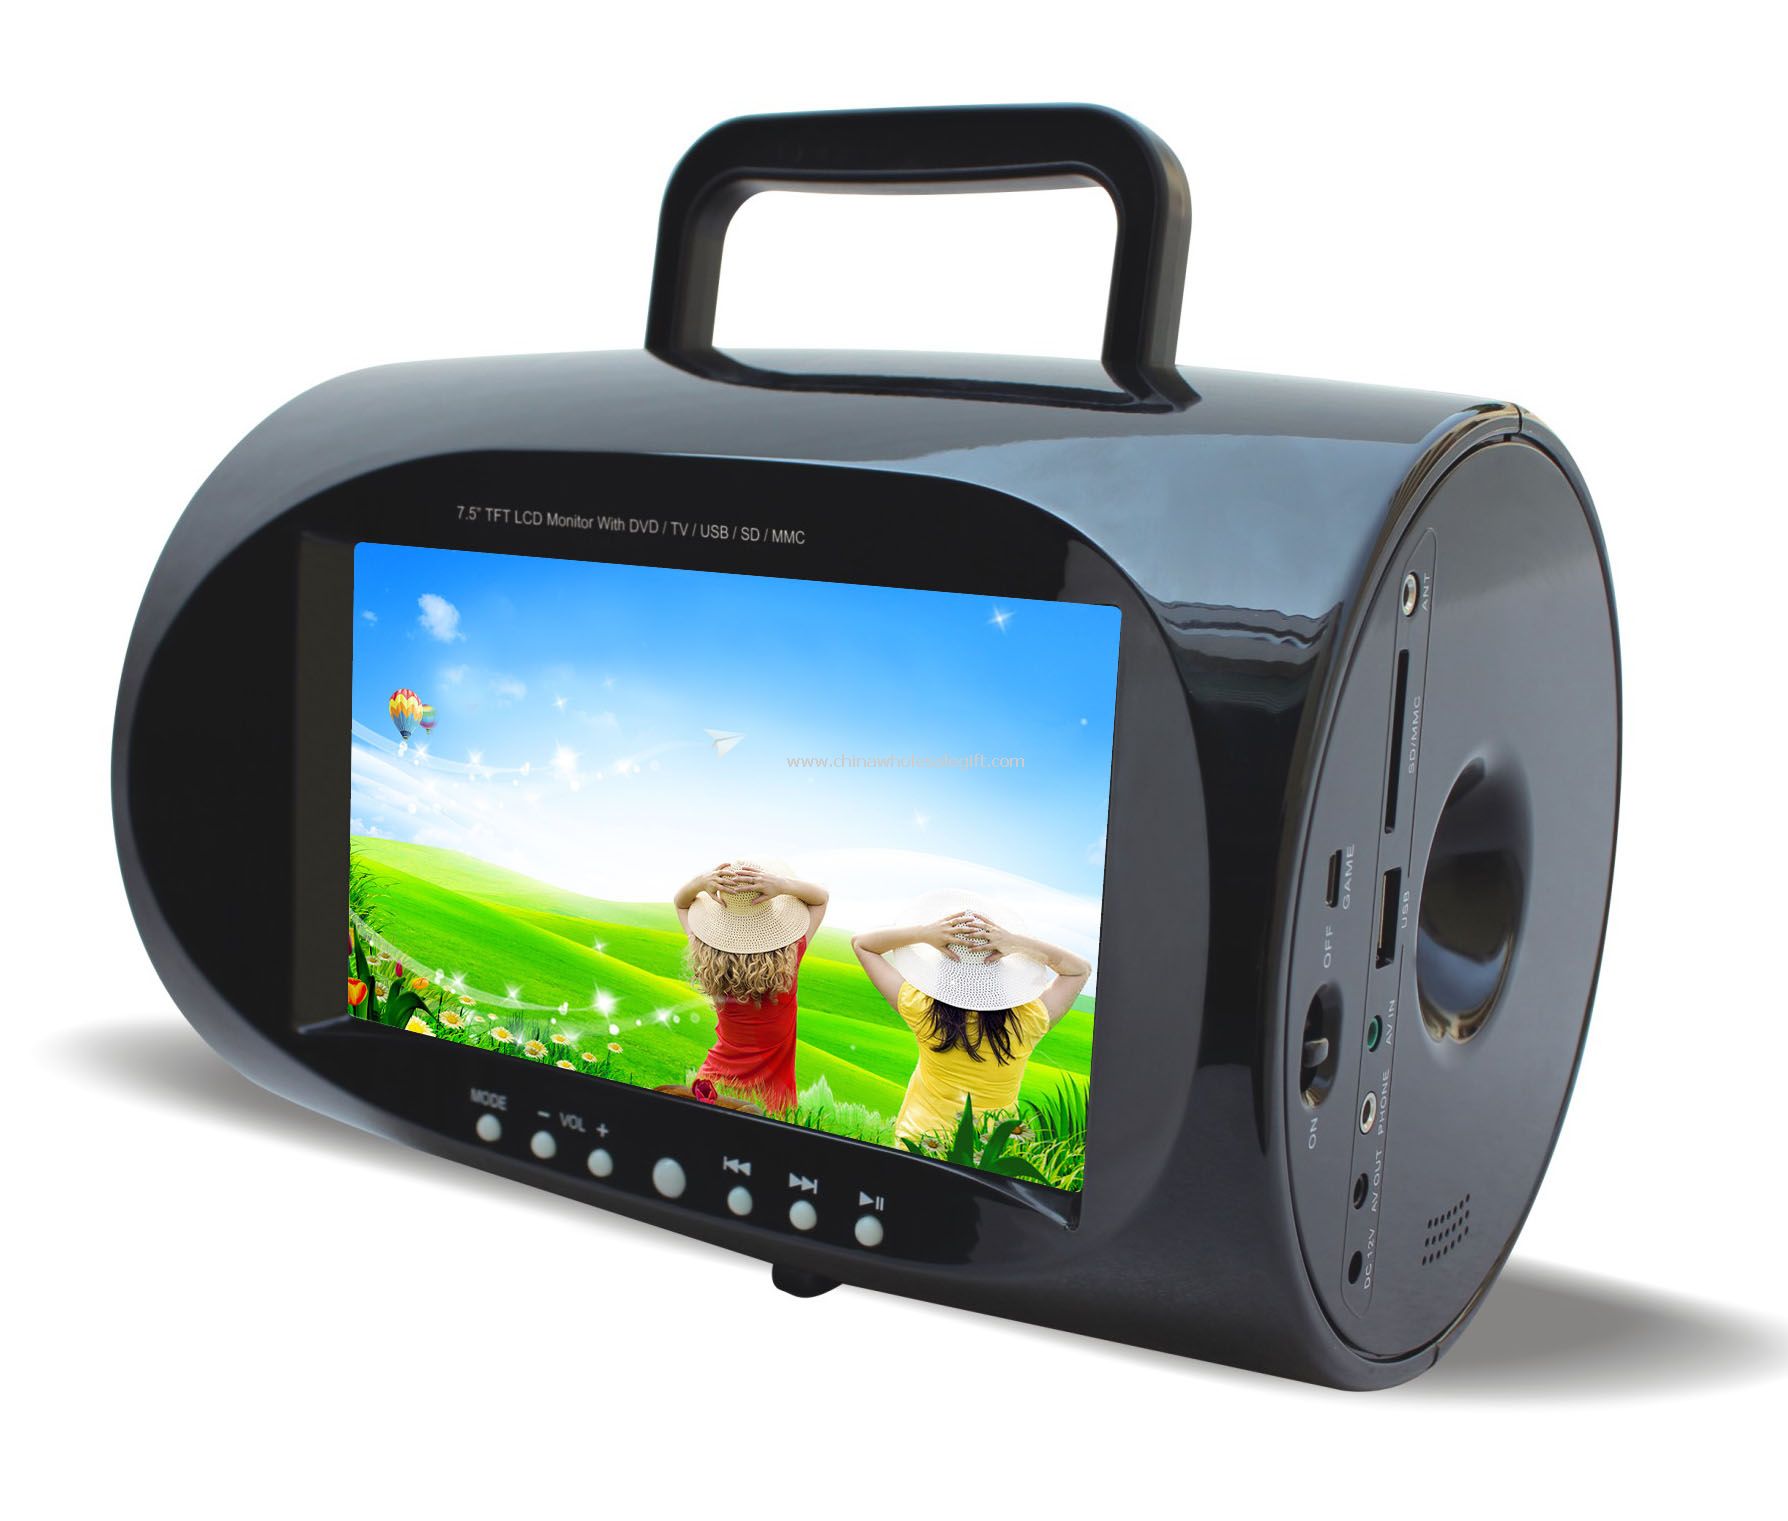 7.5 inch TFT Monitor with DVD/TV/USB/SD/MMC